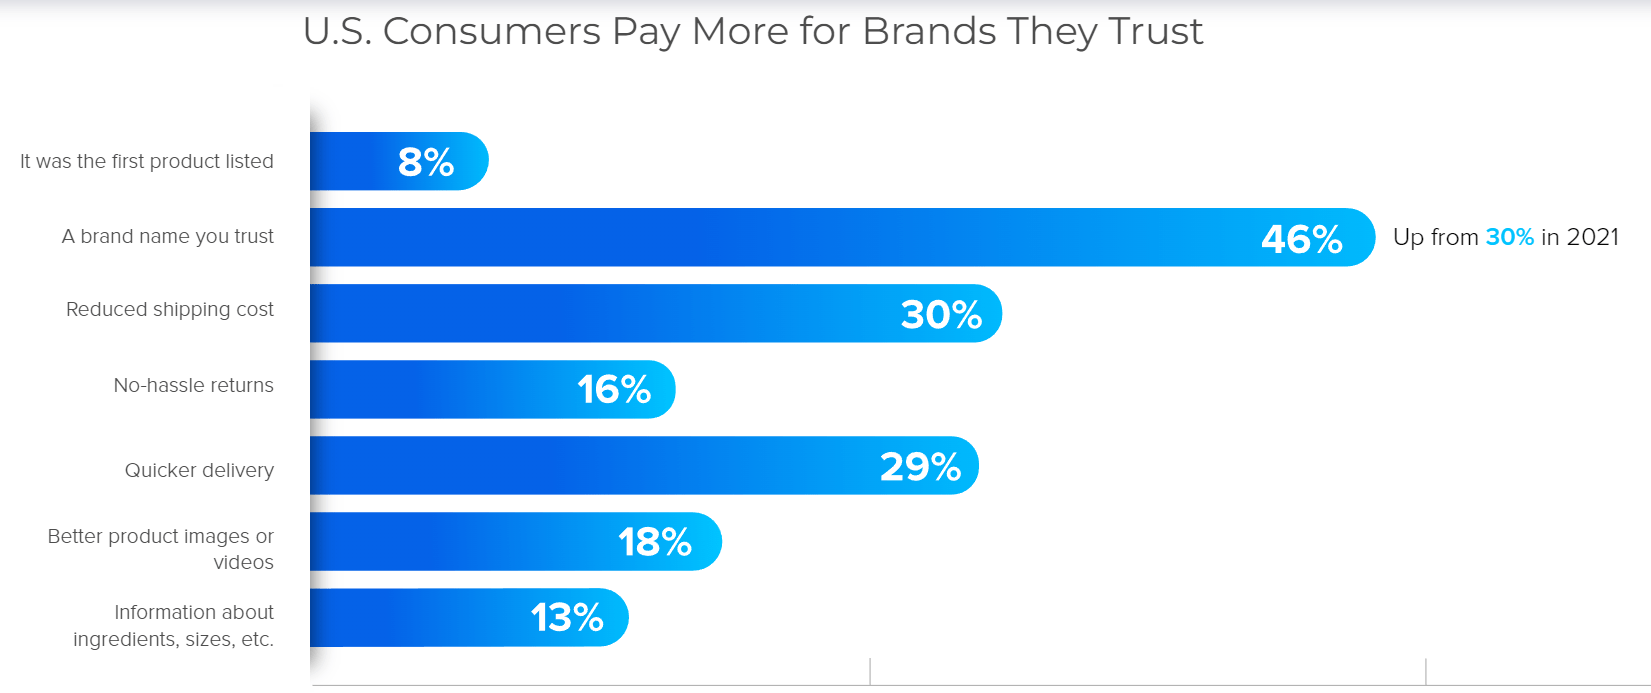 U.S. Consumers Pay More for Brands They Trust